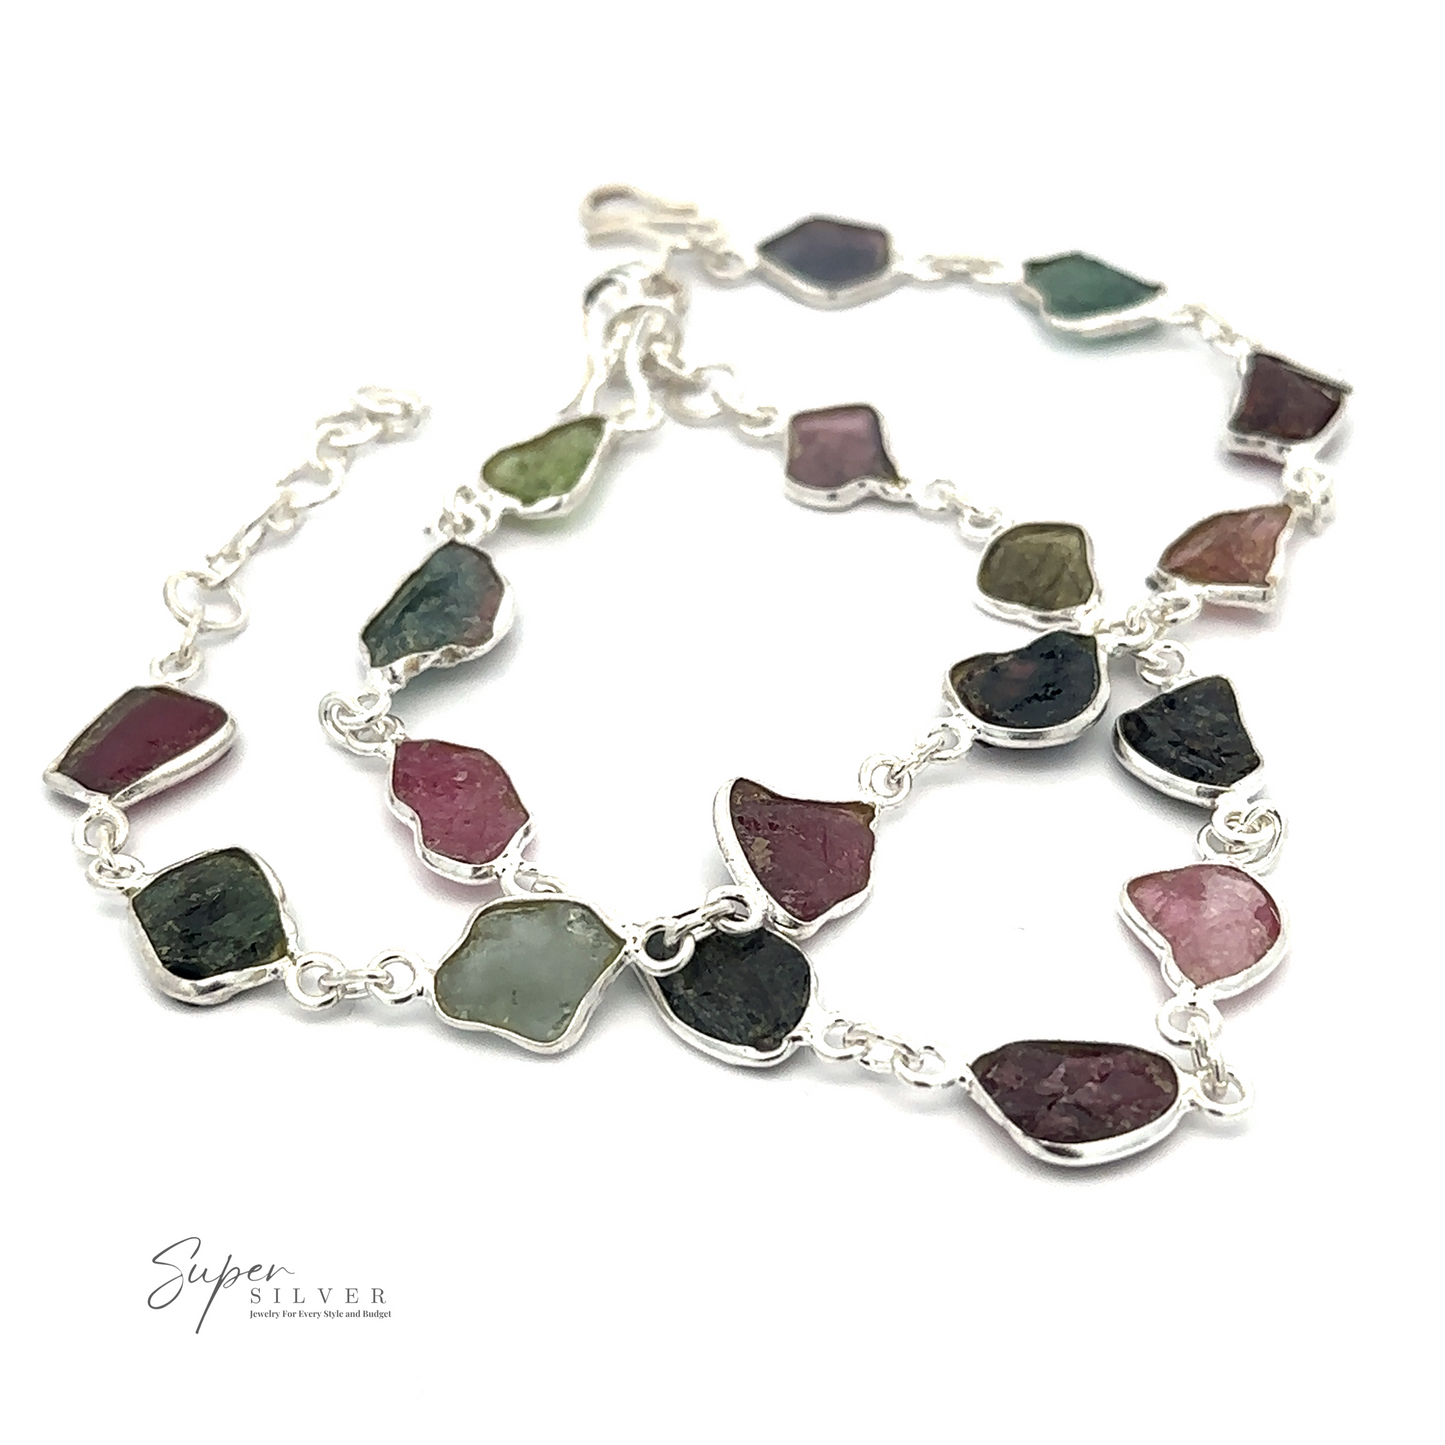 
                  
                    A Rough Tourmaline Bracelet featuring irregularly shaped, multicolored rough tourmaline stones, arranged in a linked chain design. The product exudes earthy elegance and is branded with "Super Silver" in the lower left corner.
                  
                